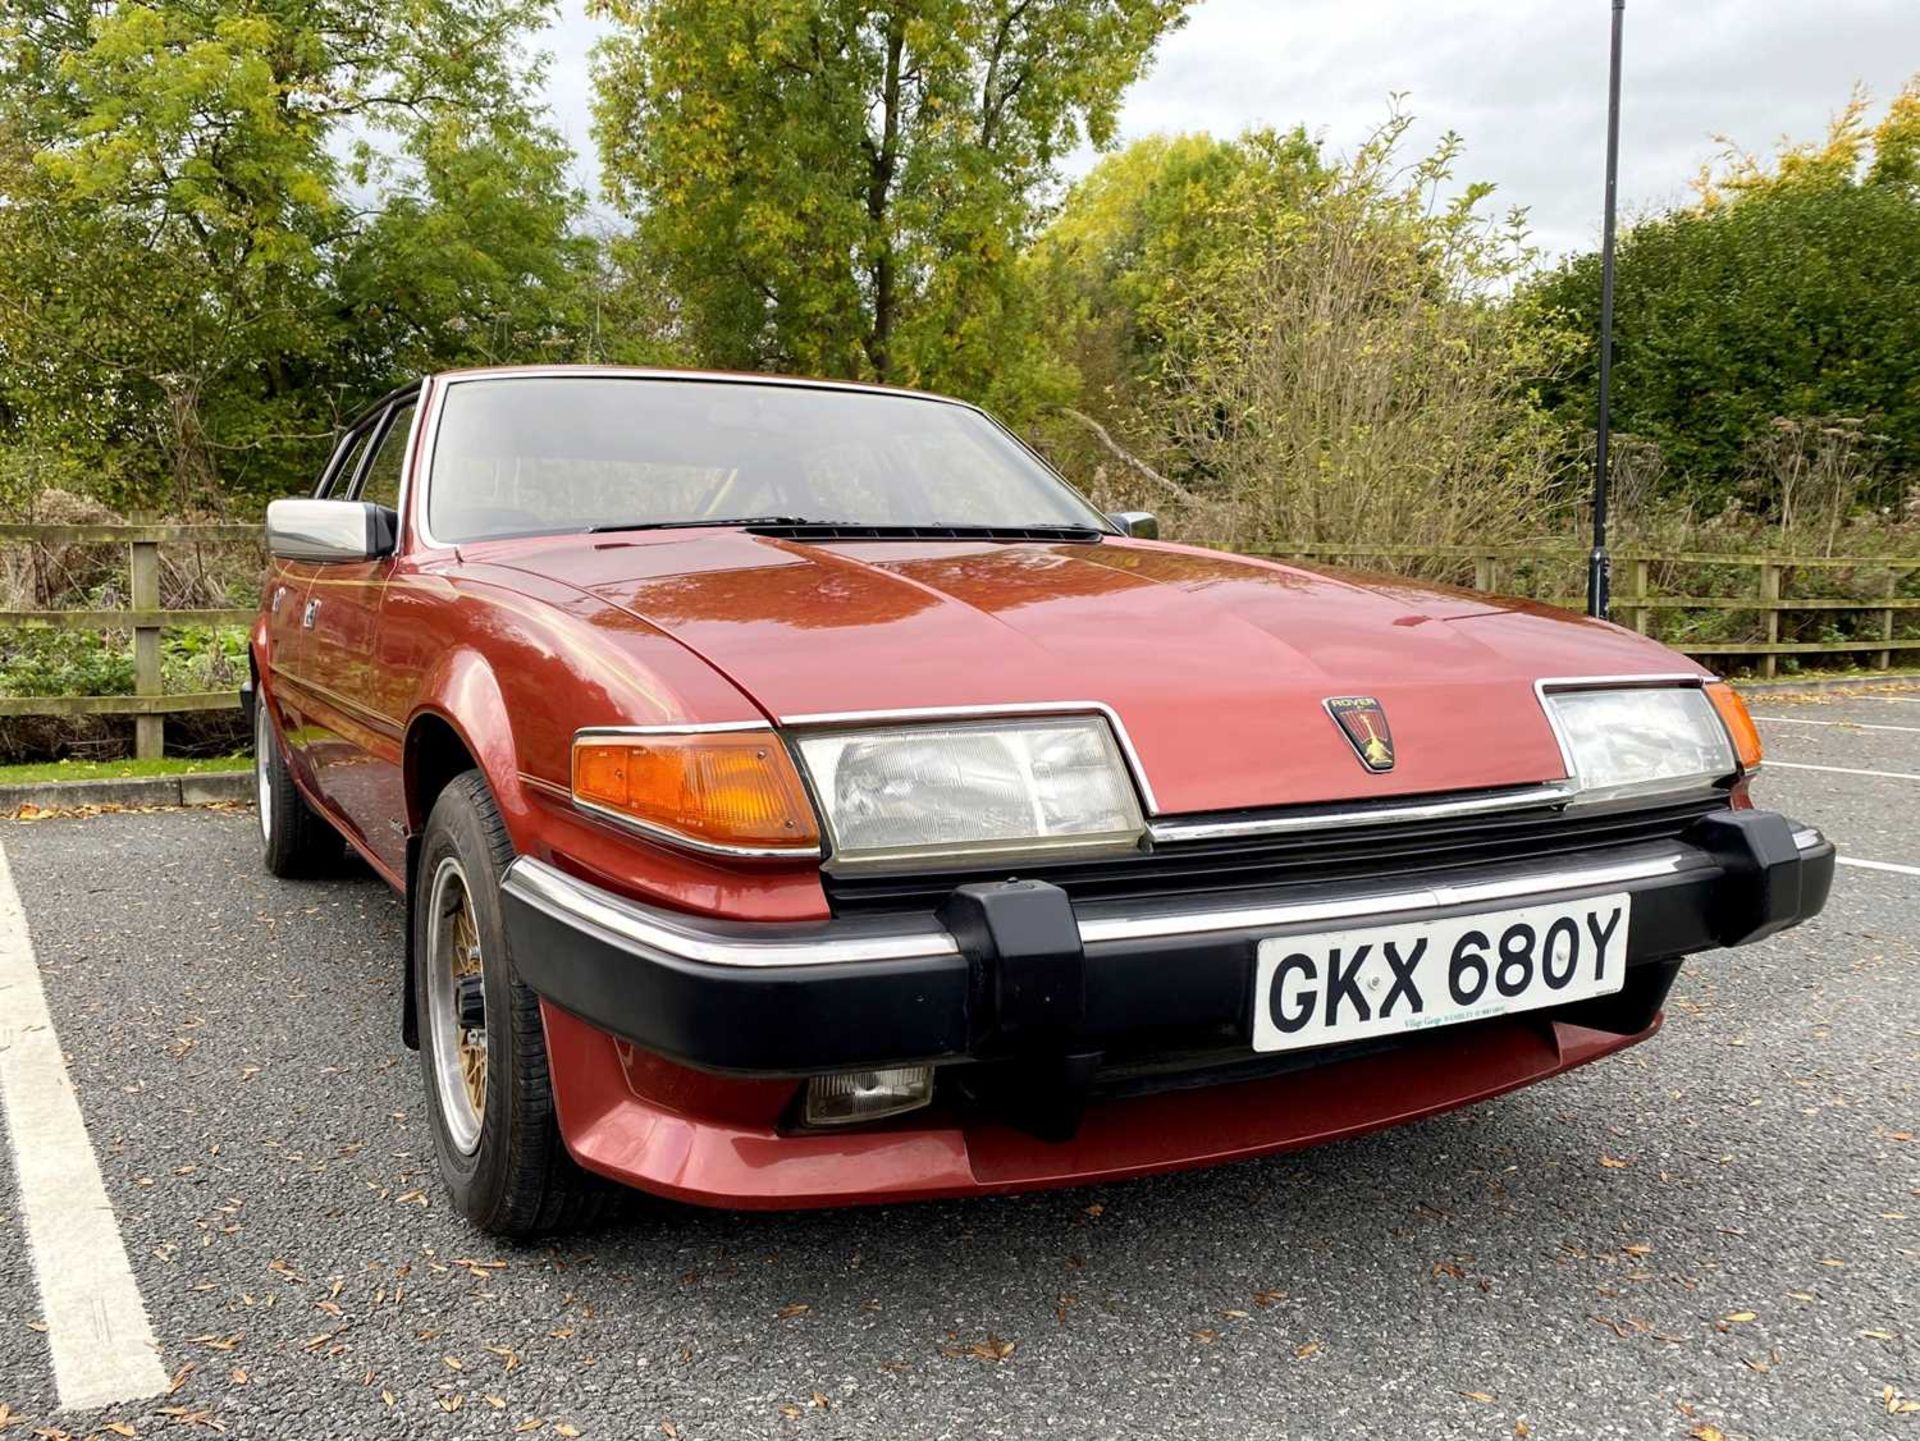 1982 Rover SD1 3500 SE Only 29,000 miles - Image 5 of 100